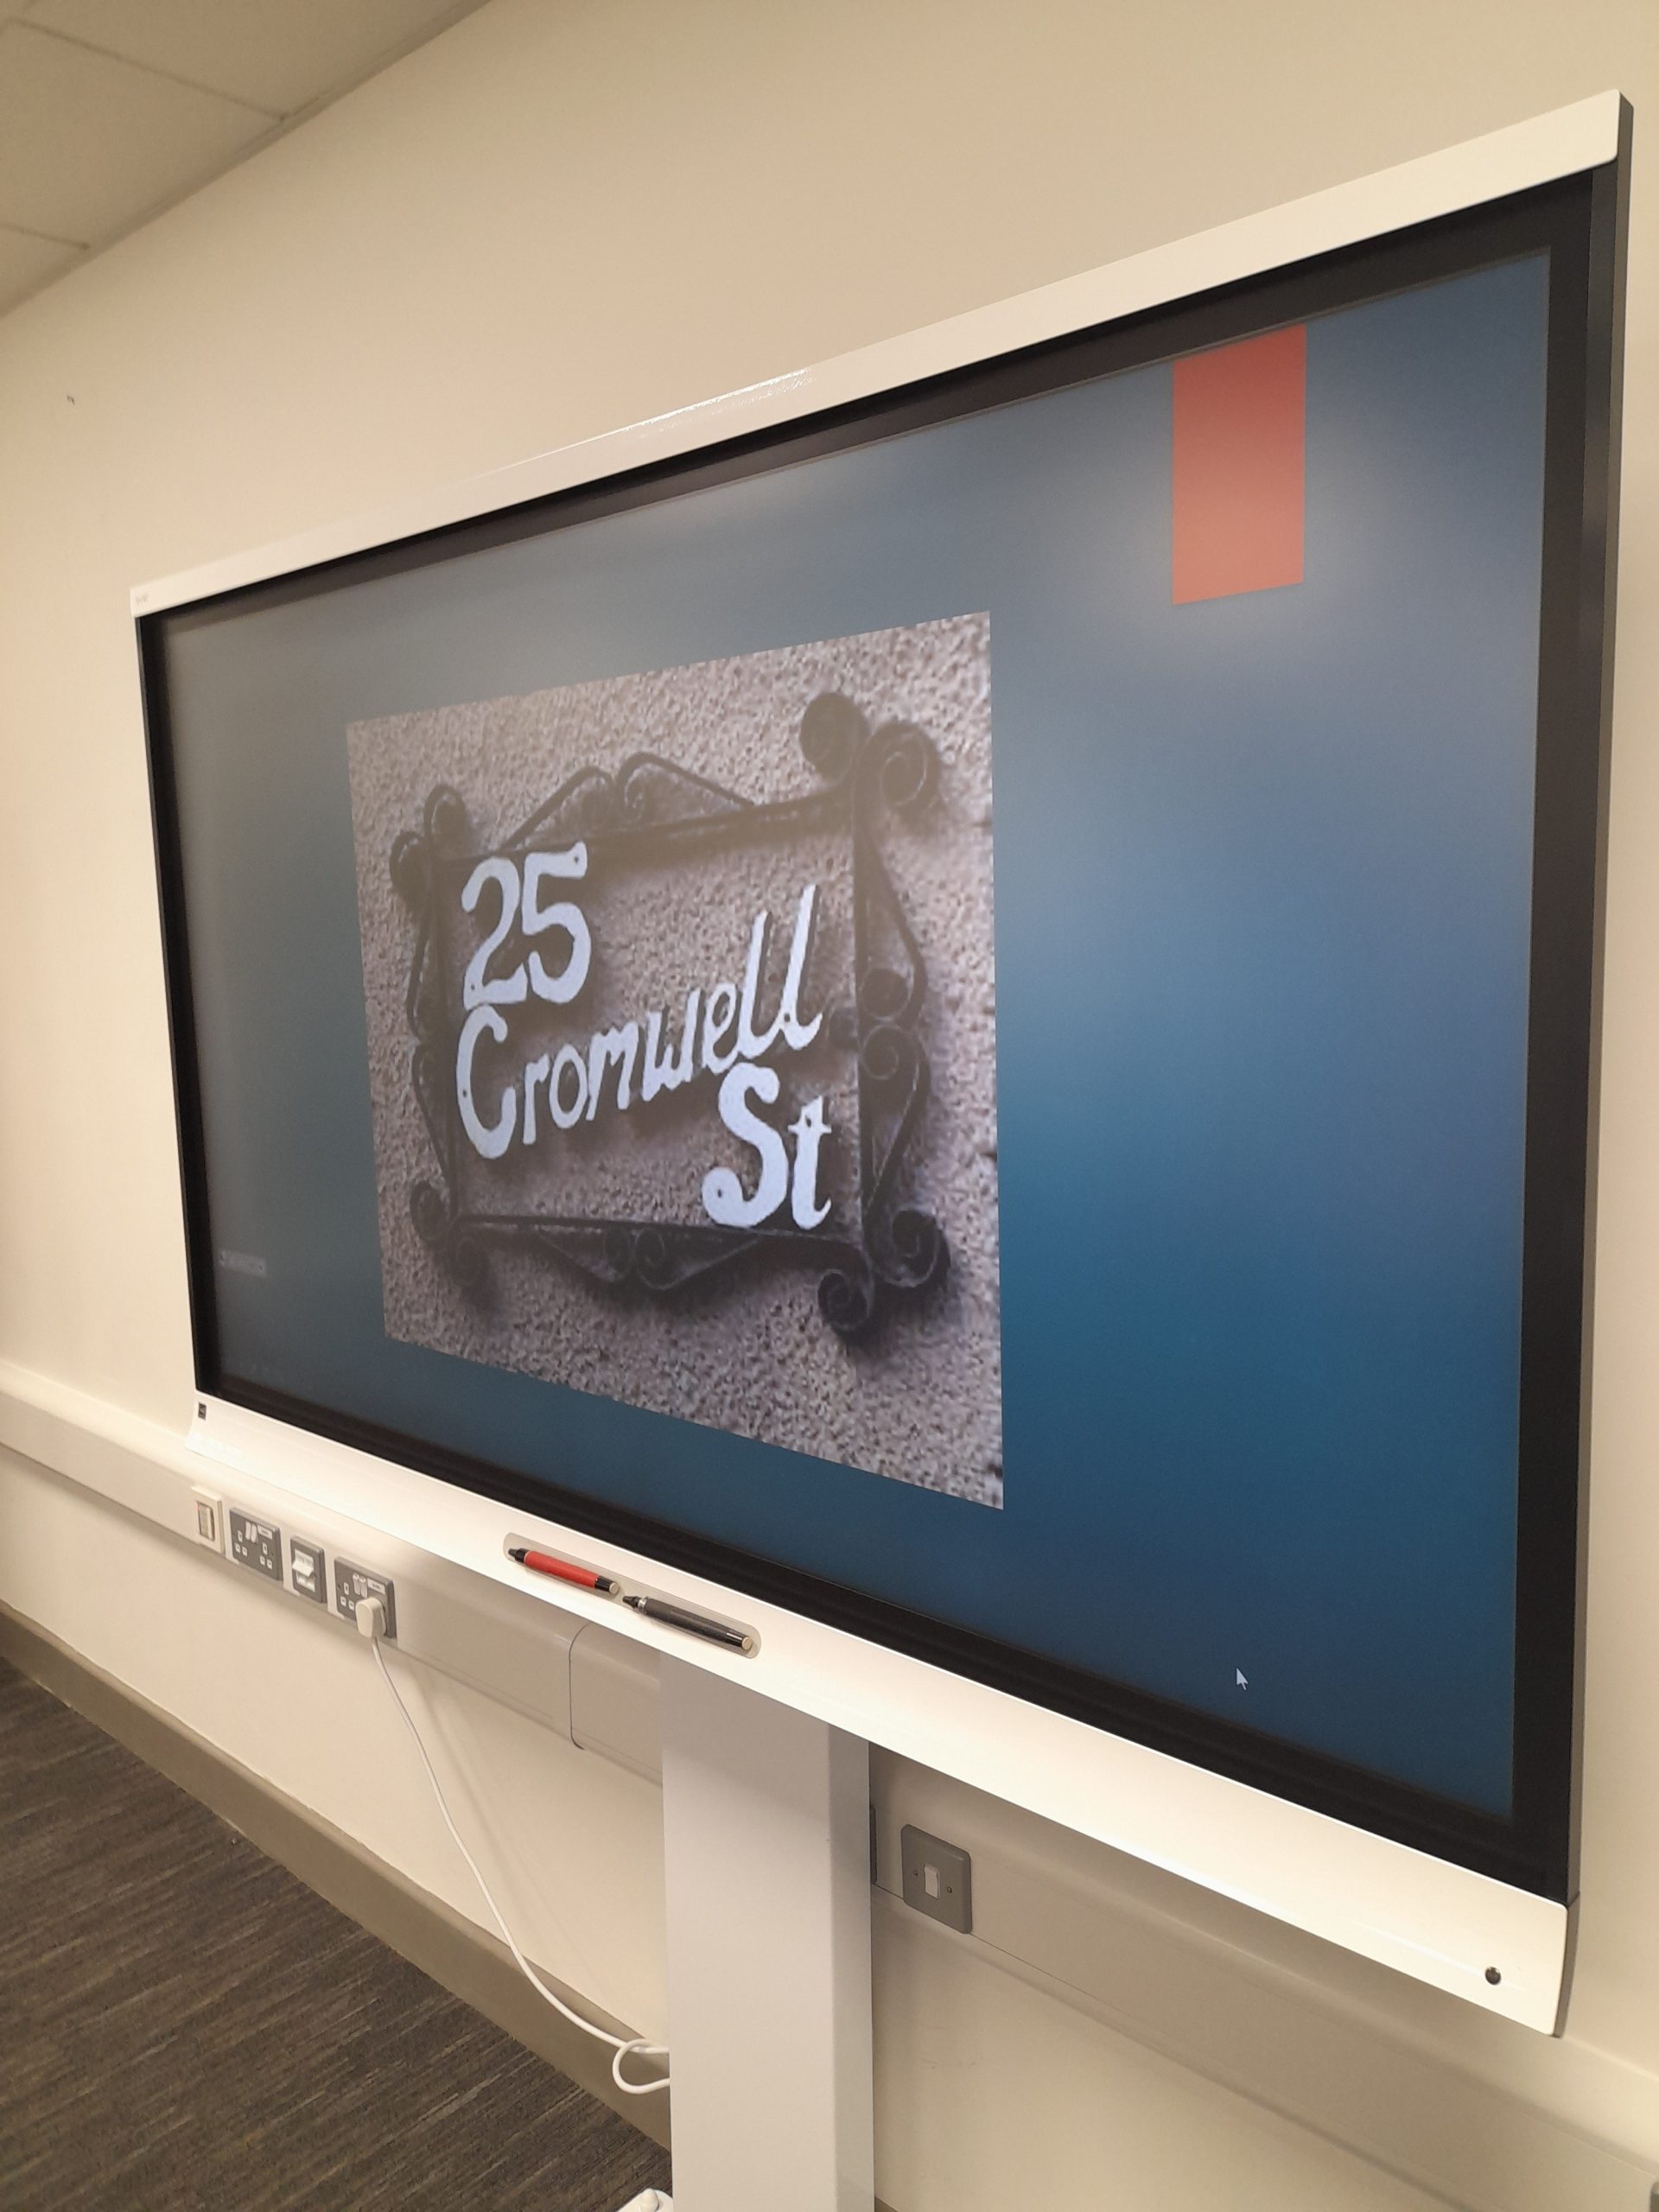 Interactive board showing presentation for Uniformed Public Services students - slide with photo of '25 Cromwell St.' sign